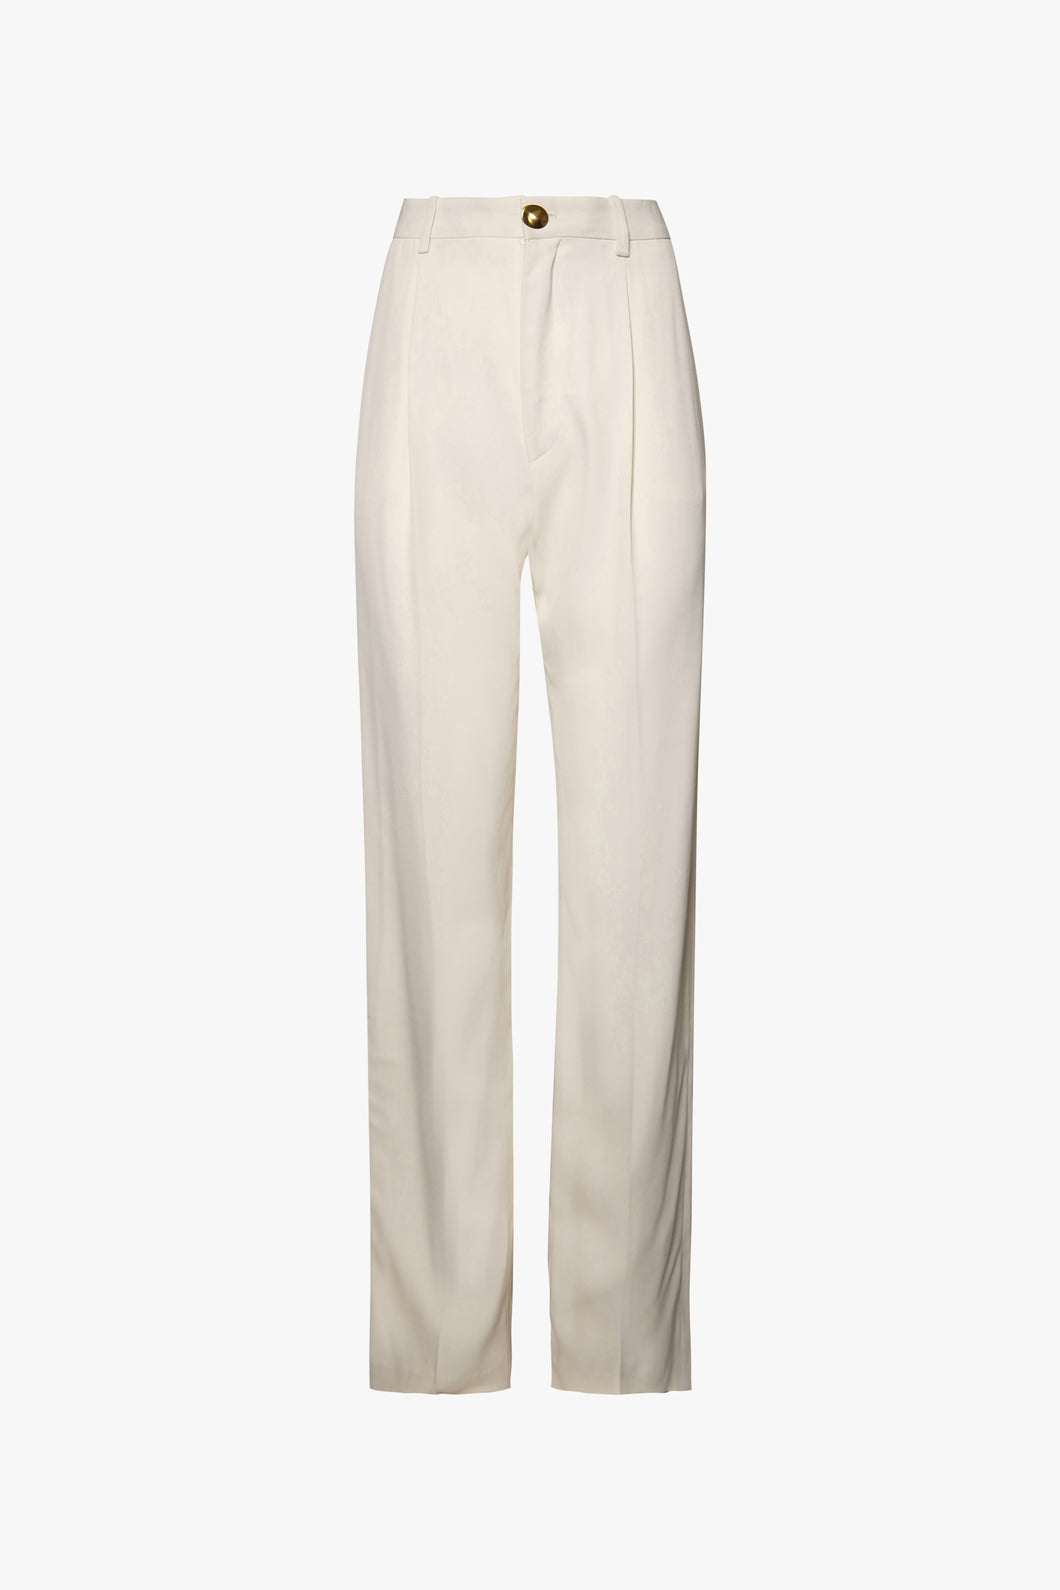 Spring Summer 22 'Hector' Pant